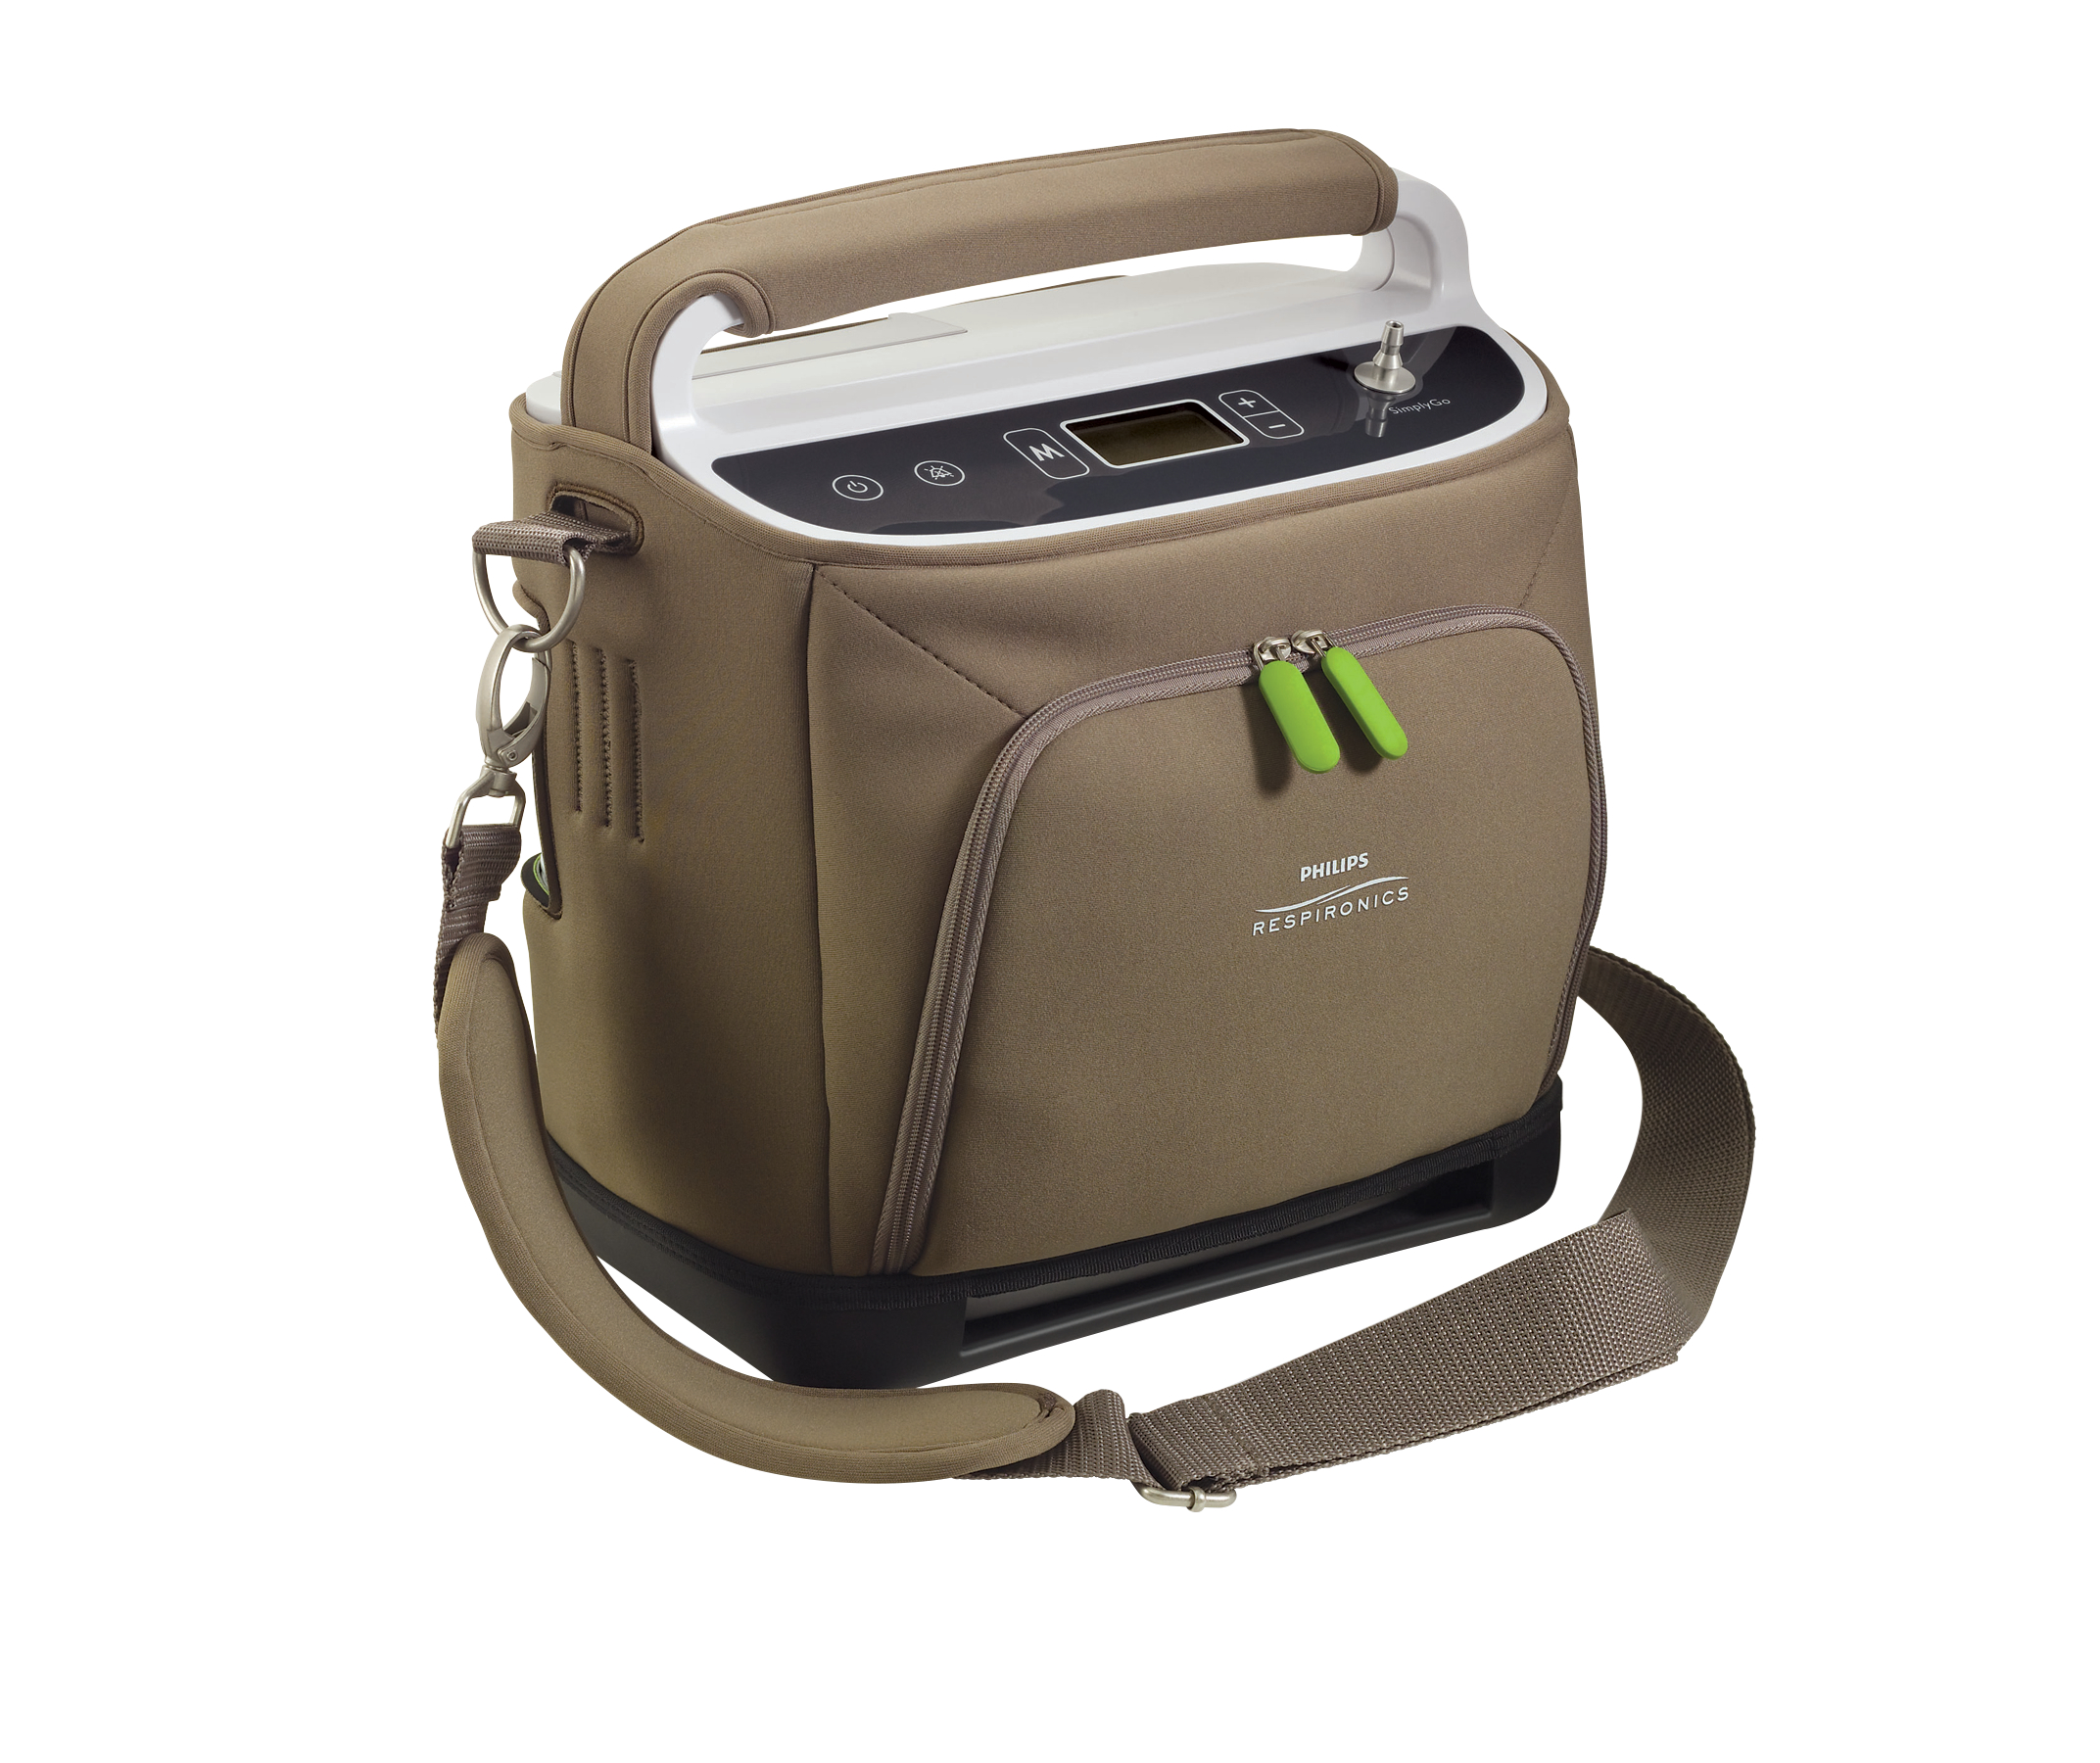 Photo of the SimplyGo Portable Oxygen Concentrator in a bag.